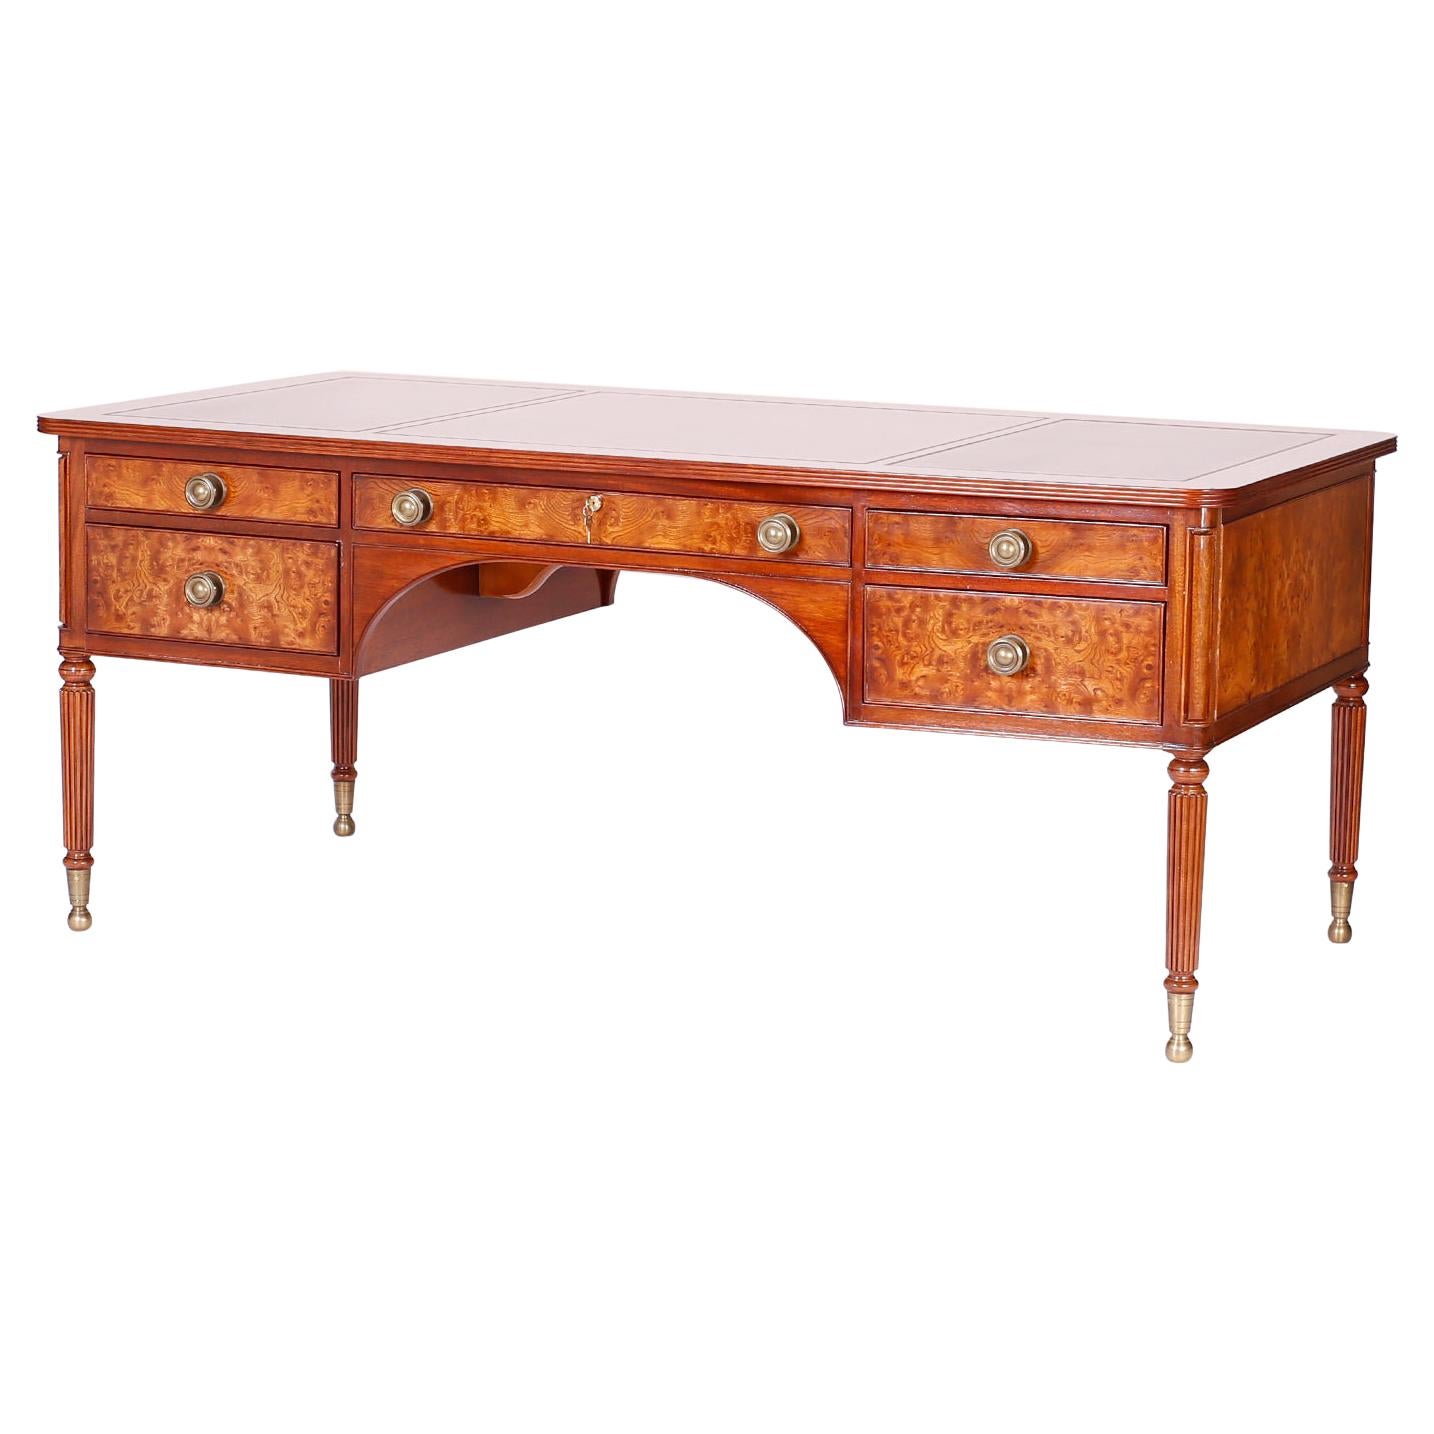 British Colonial Style Leather Top Desk For Sale